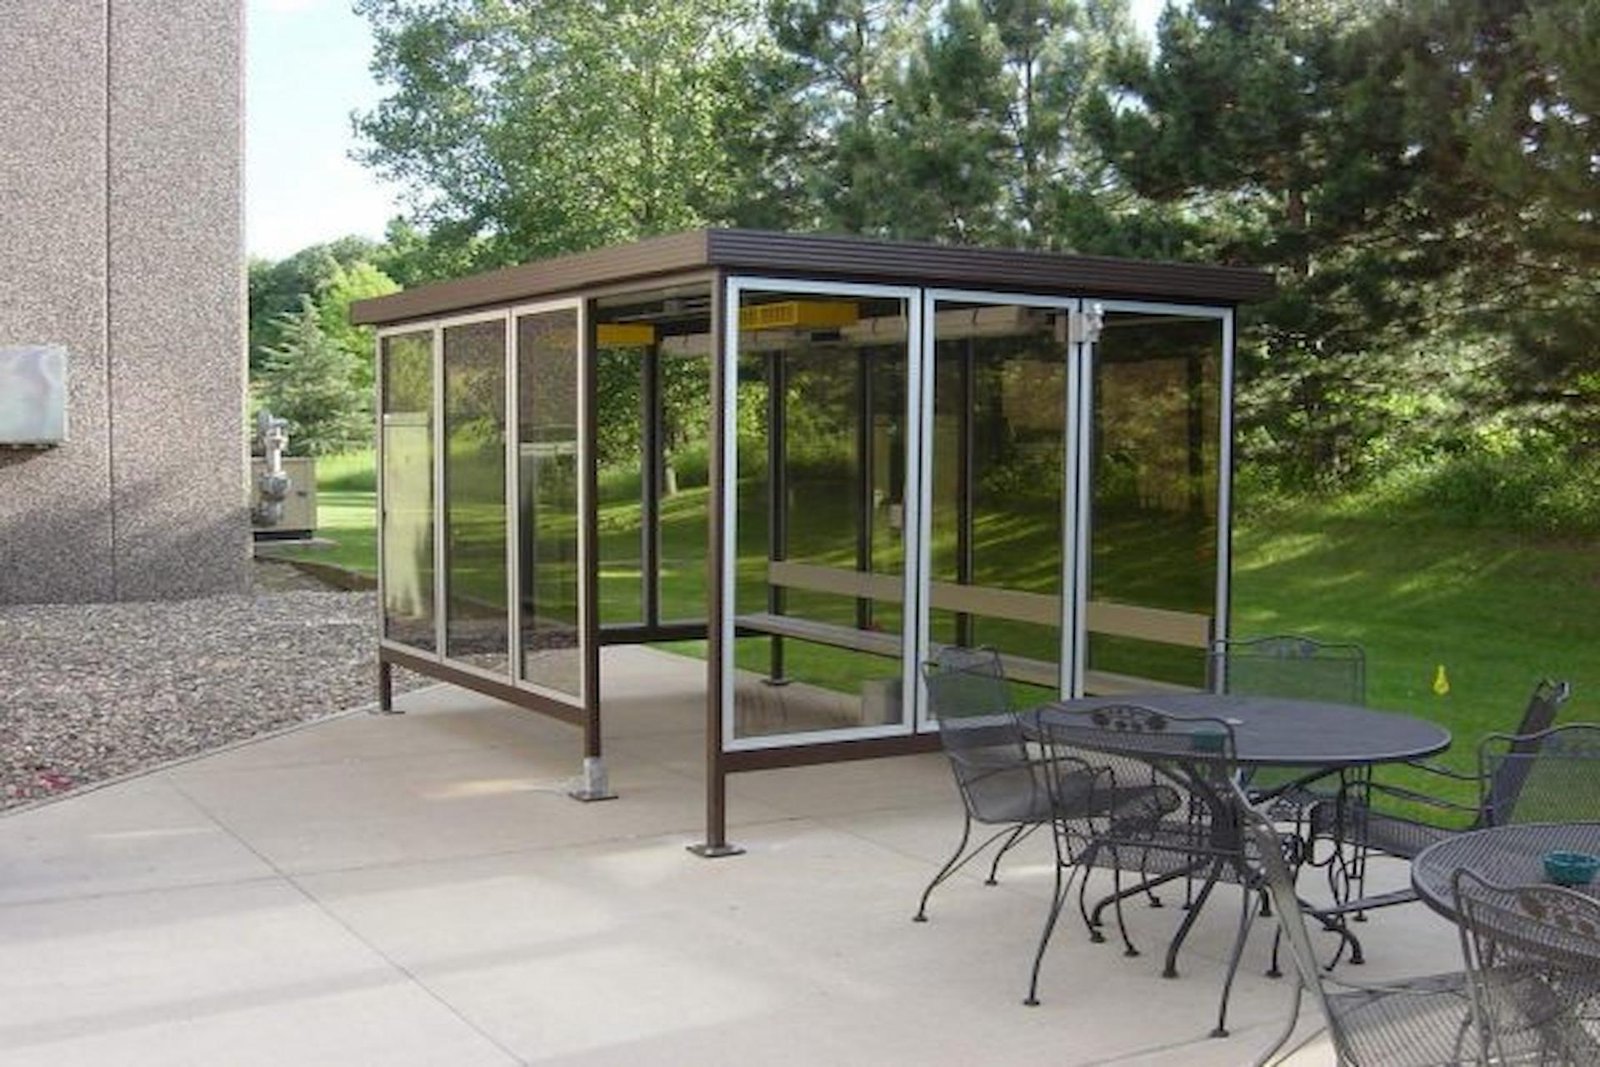 Exploring the Legal and Ethical Implications of Smoking Shelters